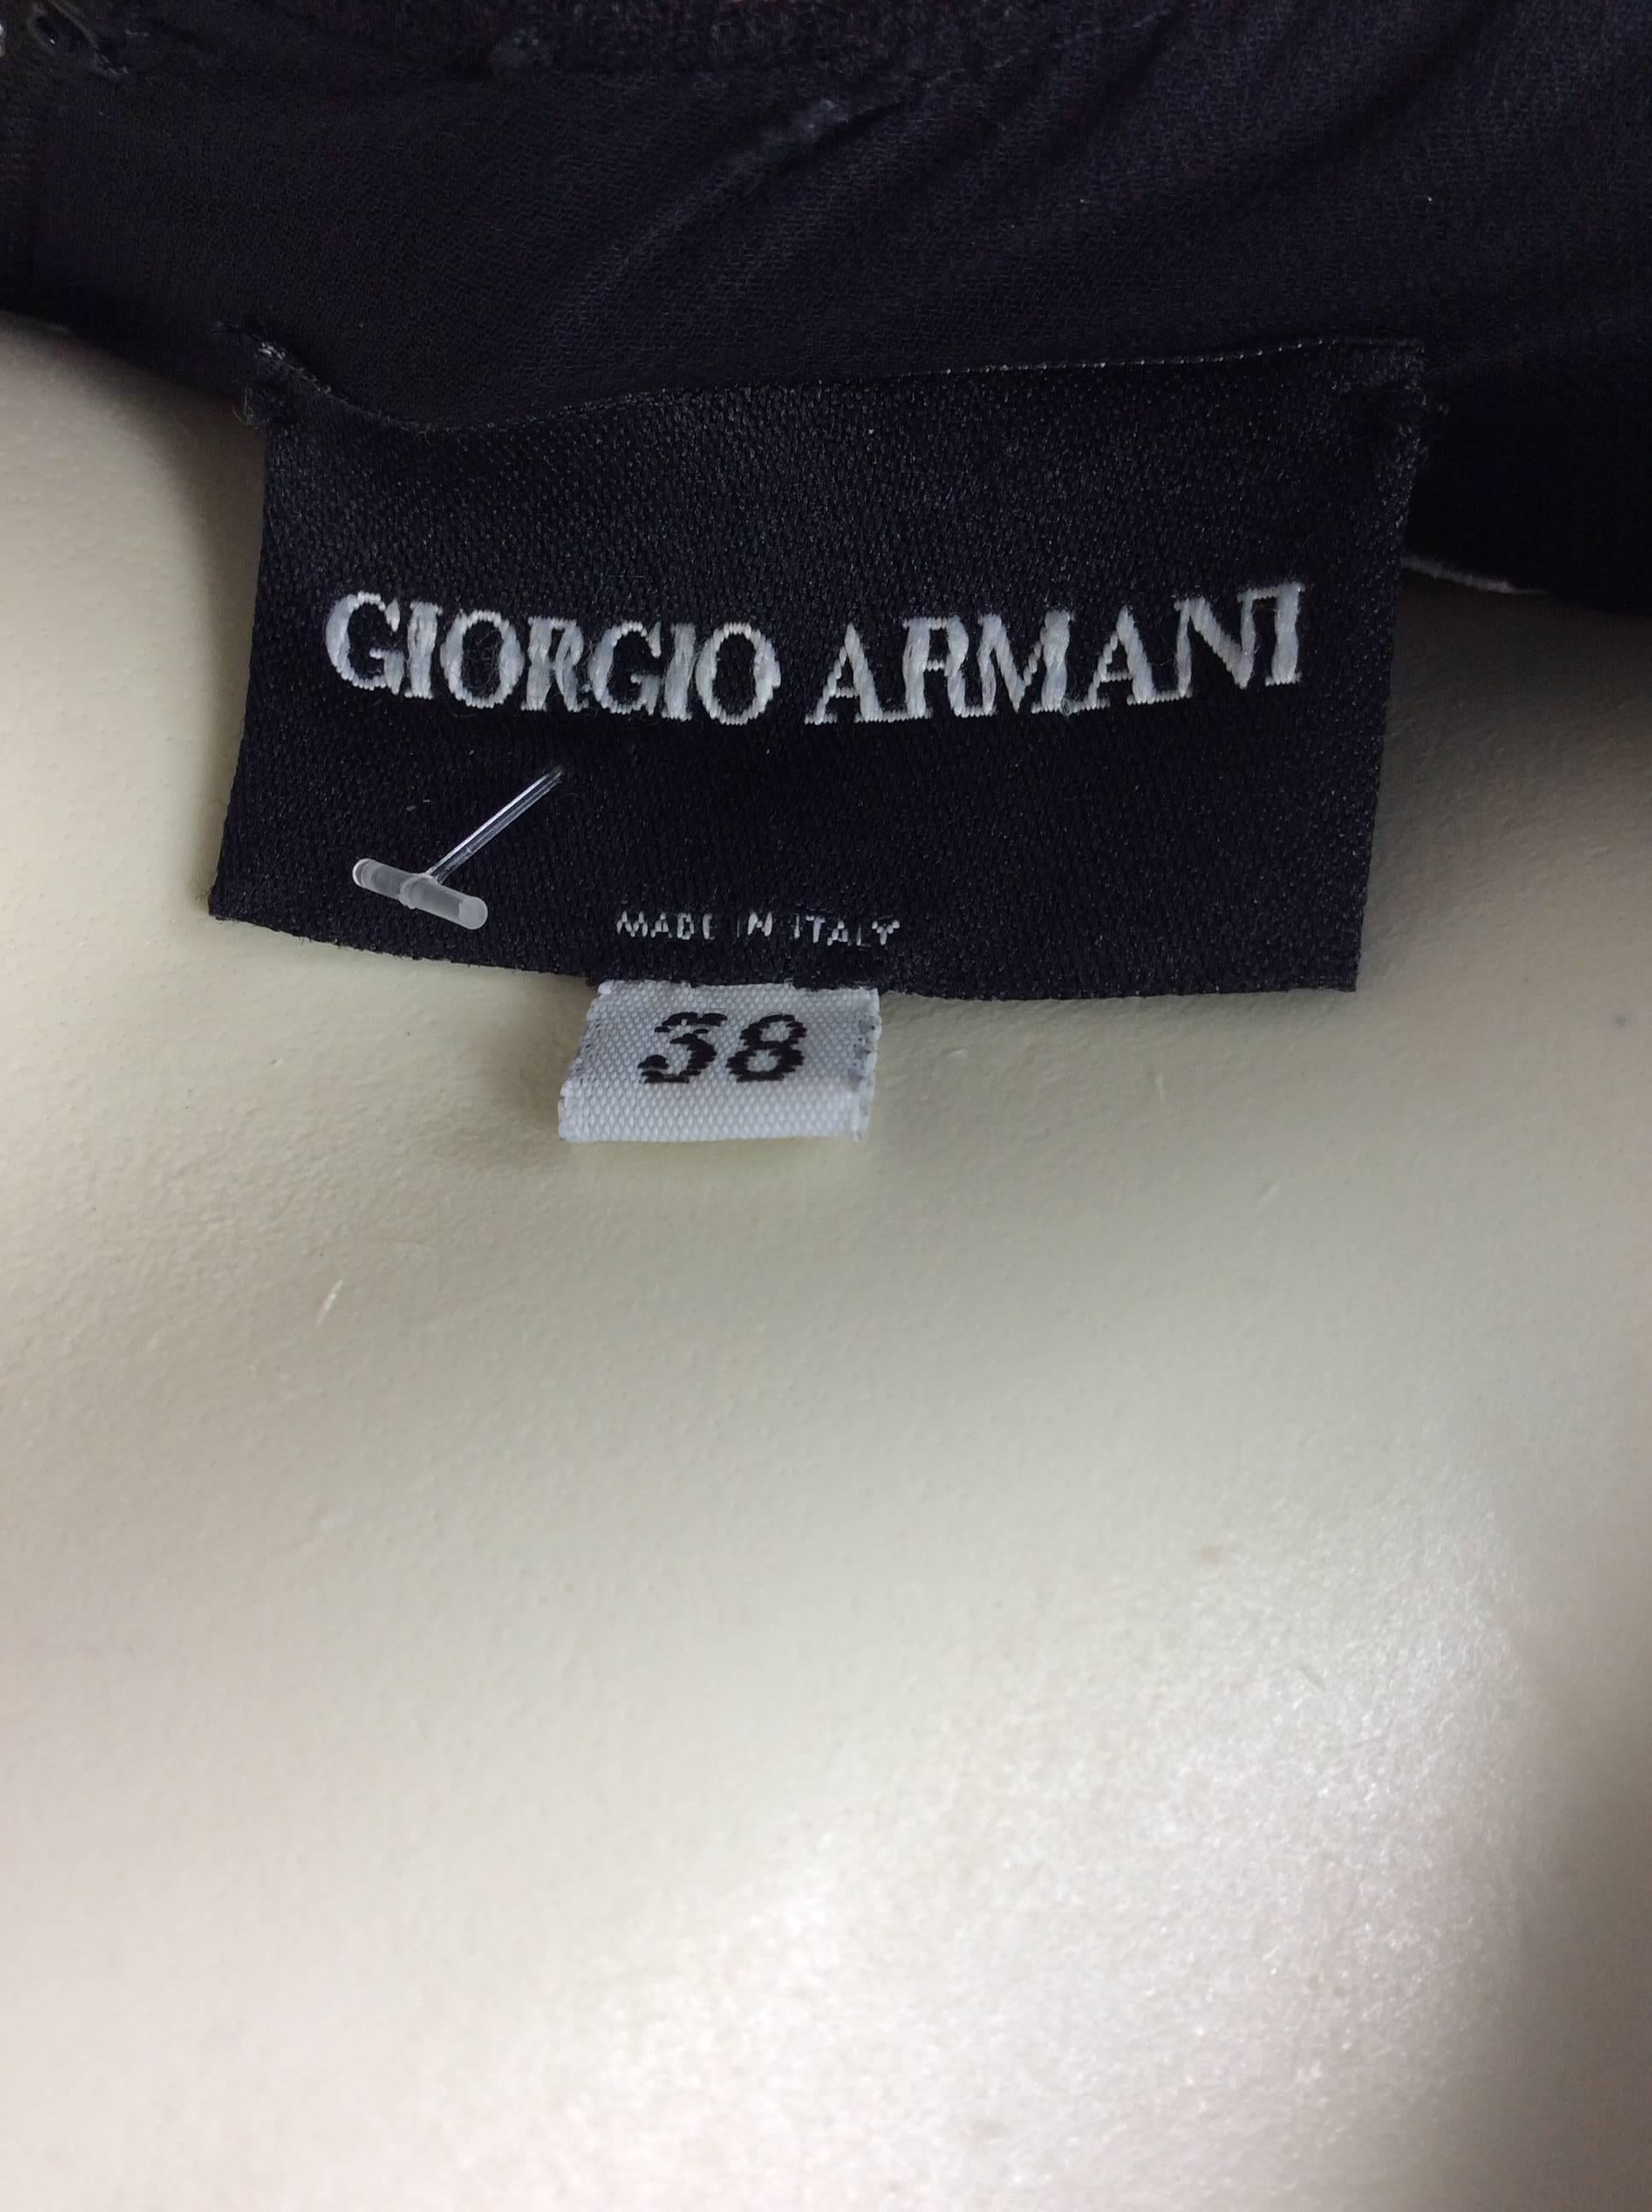 Giorgio Armani Black Crepe Mid Length Front Slit Dress In Excellent Condition For Sale In Narberth, PA